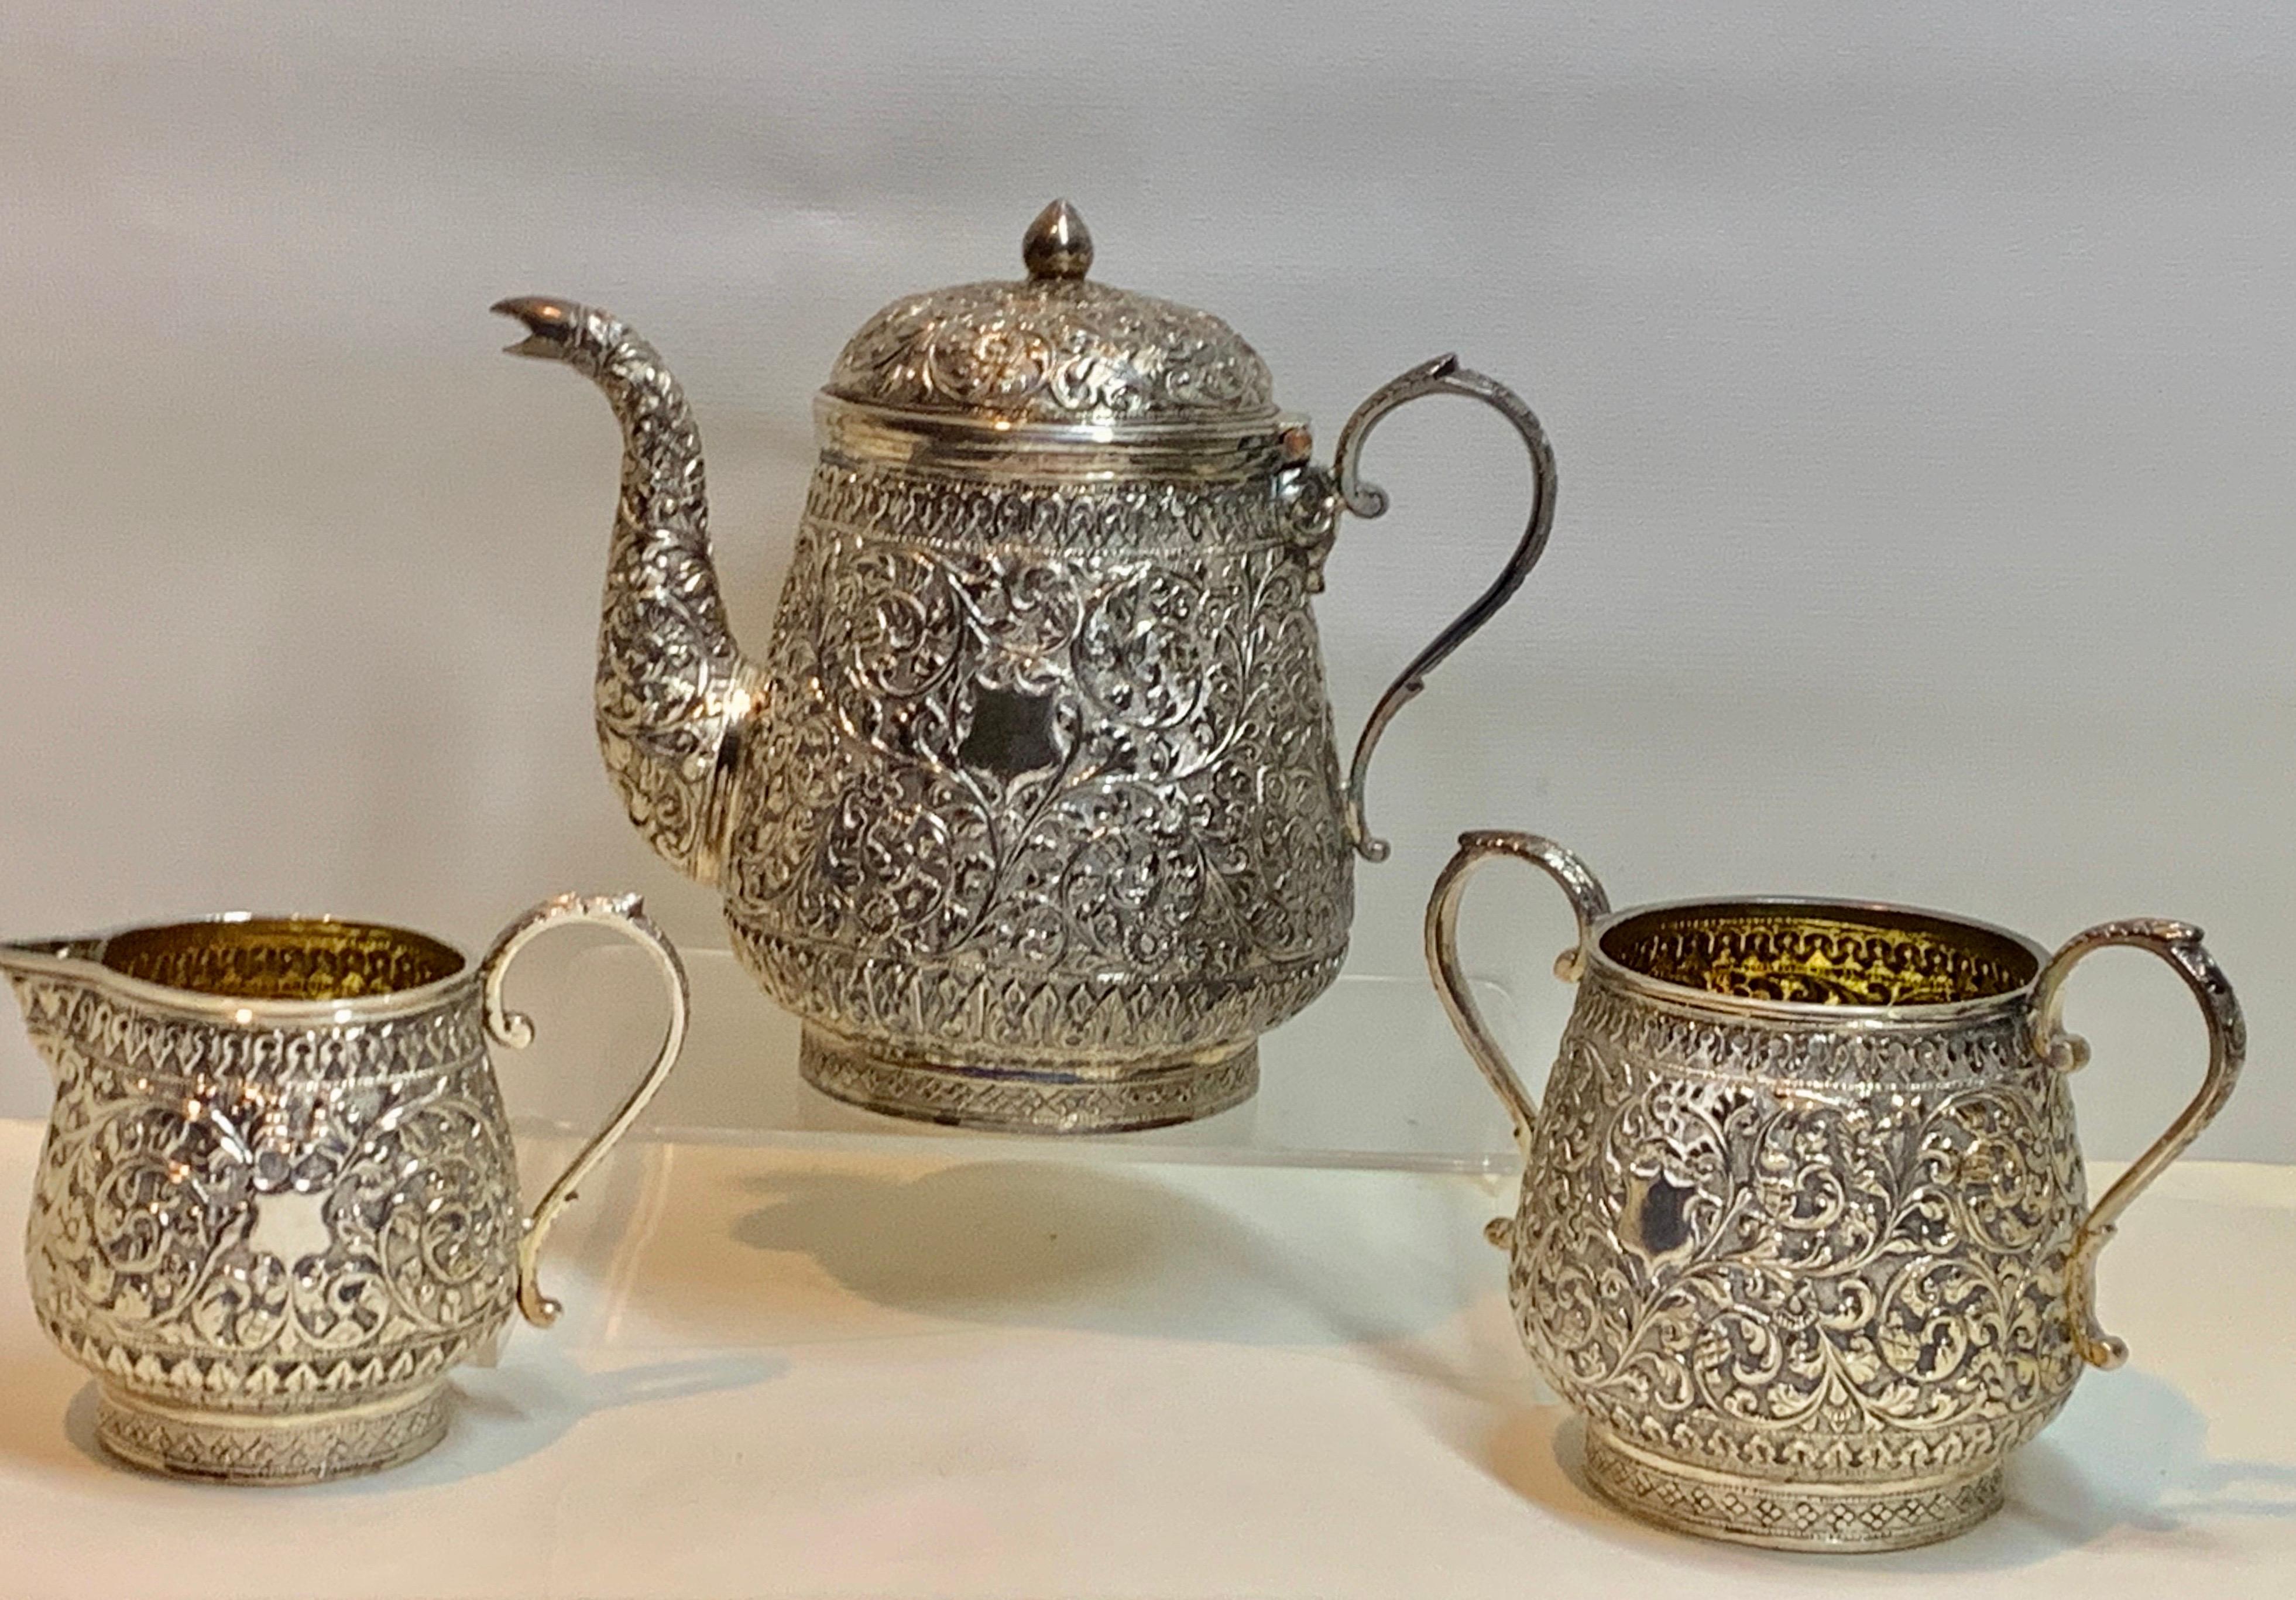 A wonderful Indian silver tea set comprising teapot, milk jug and sugar bowl. It is richly decorated with a dense floral pattern of the Western Kutch region and they date around 1850.
The interiors show signs of being gilded originally although it